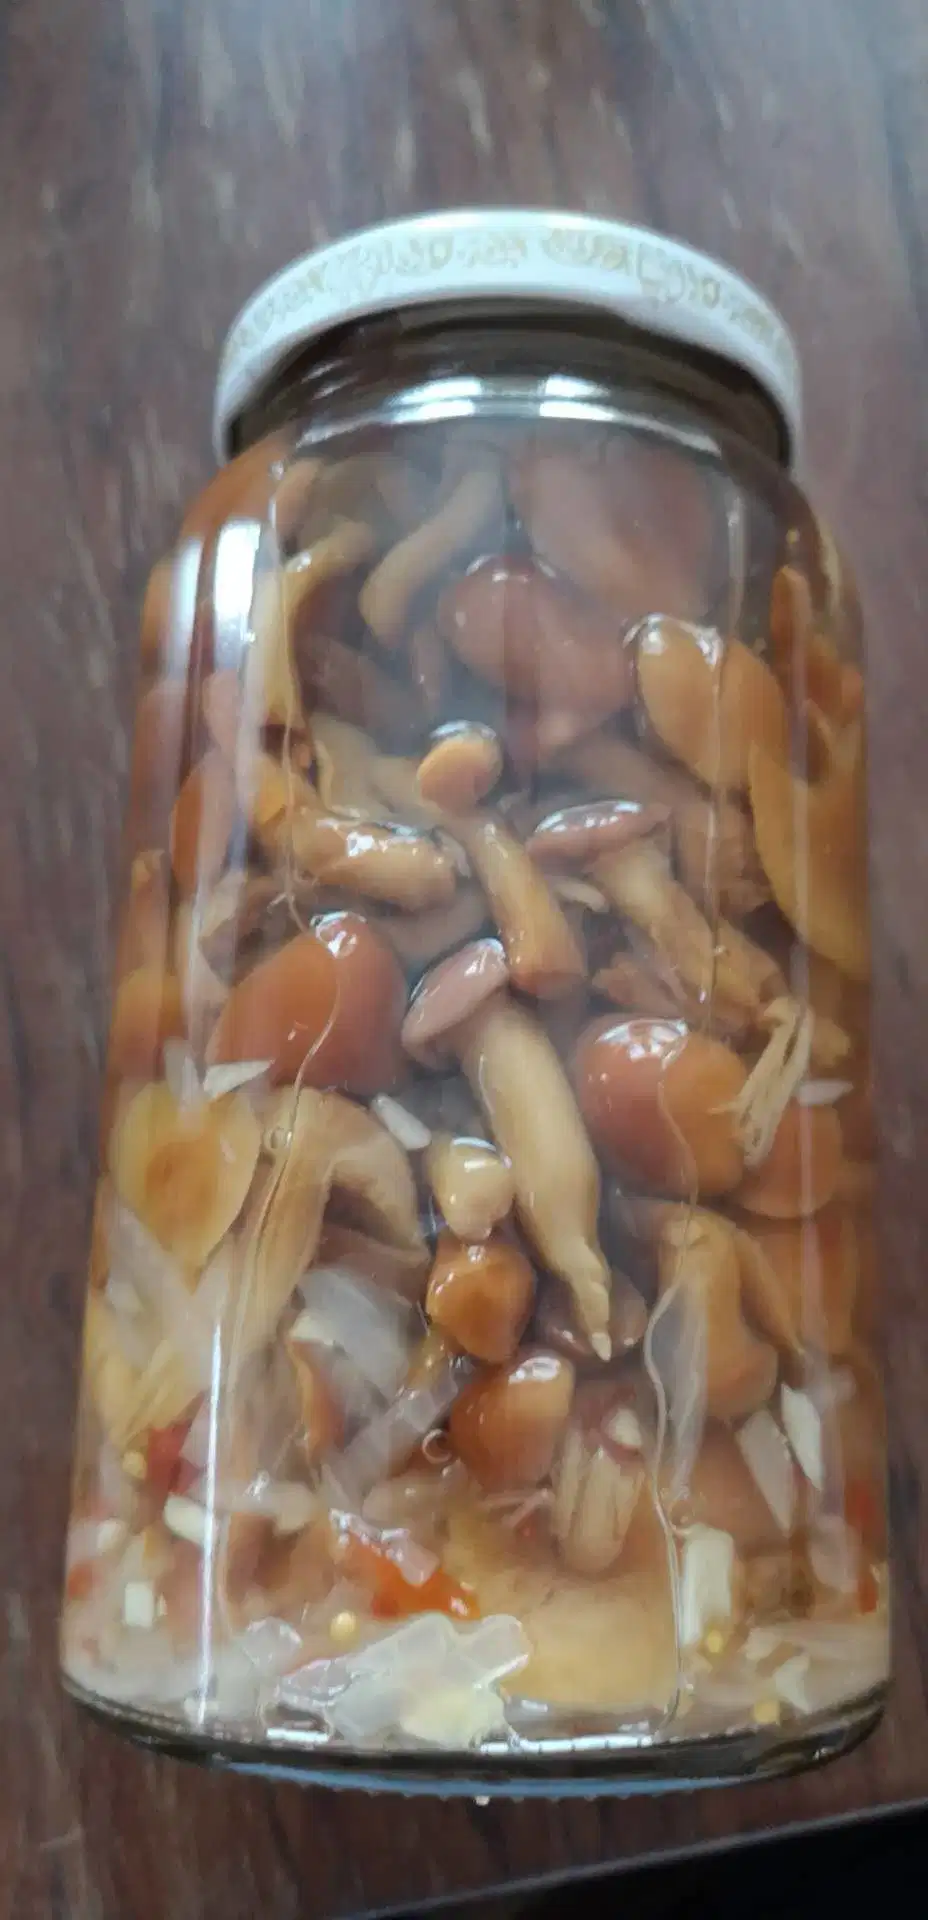 Canned Assorted Mushrooms in Brine